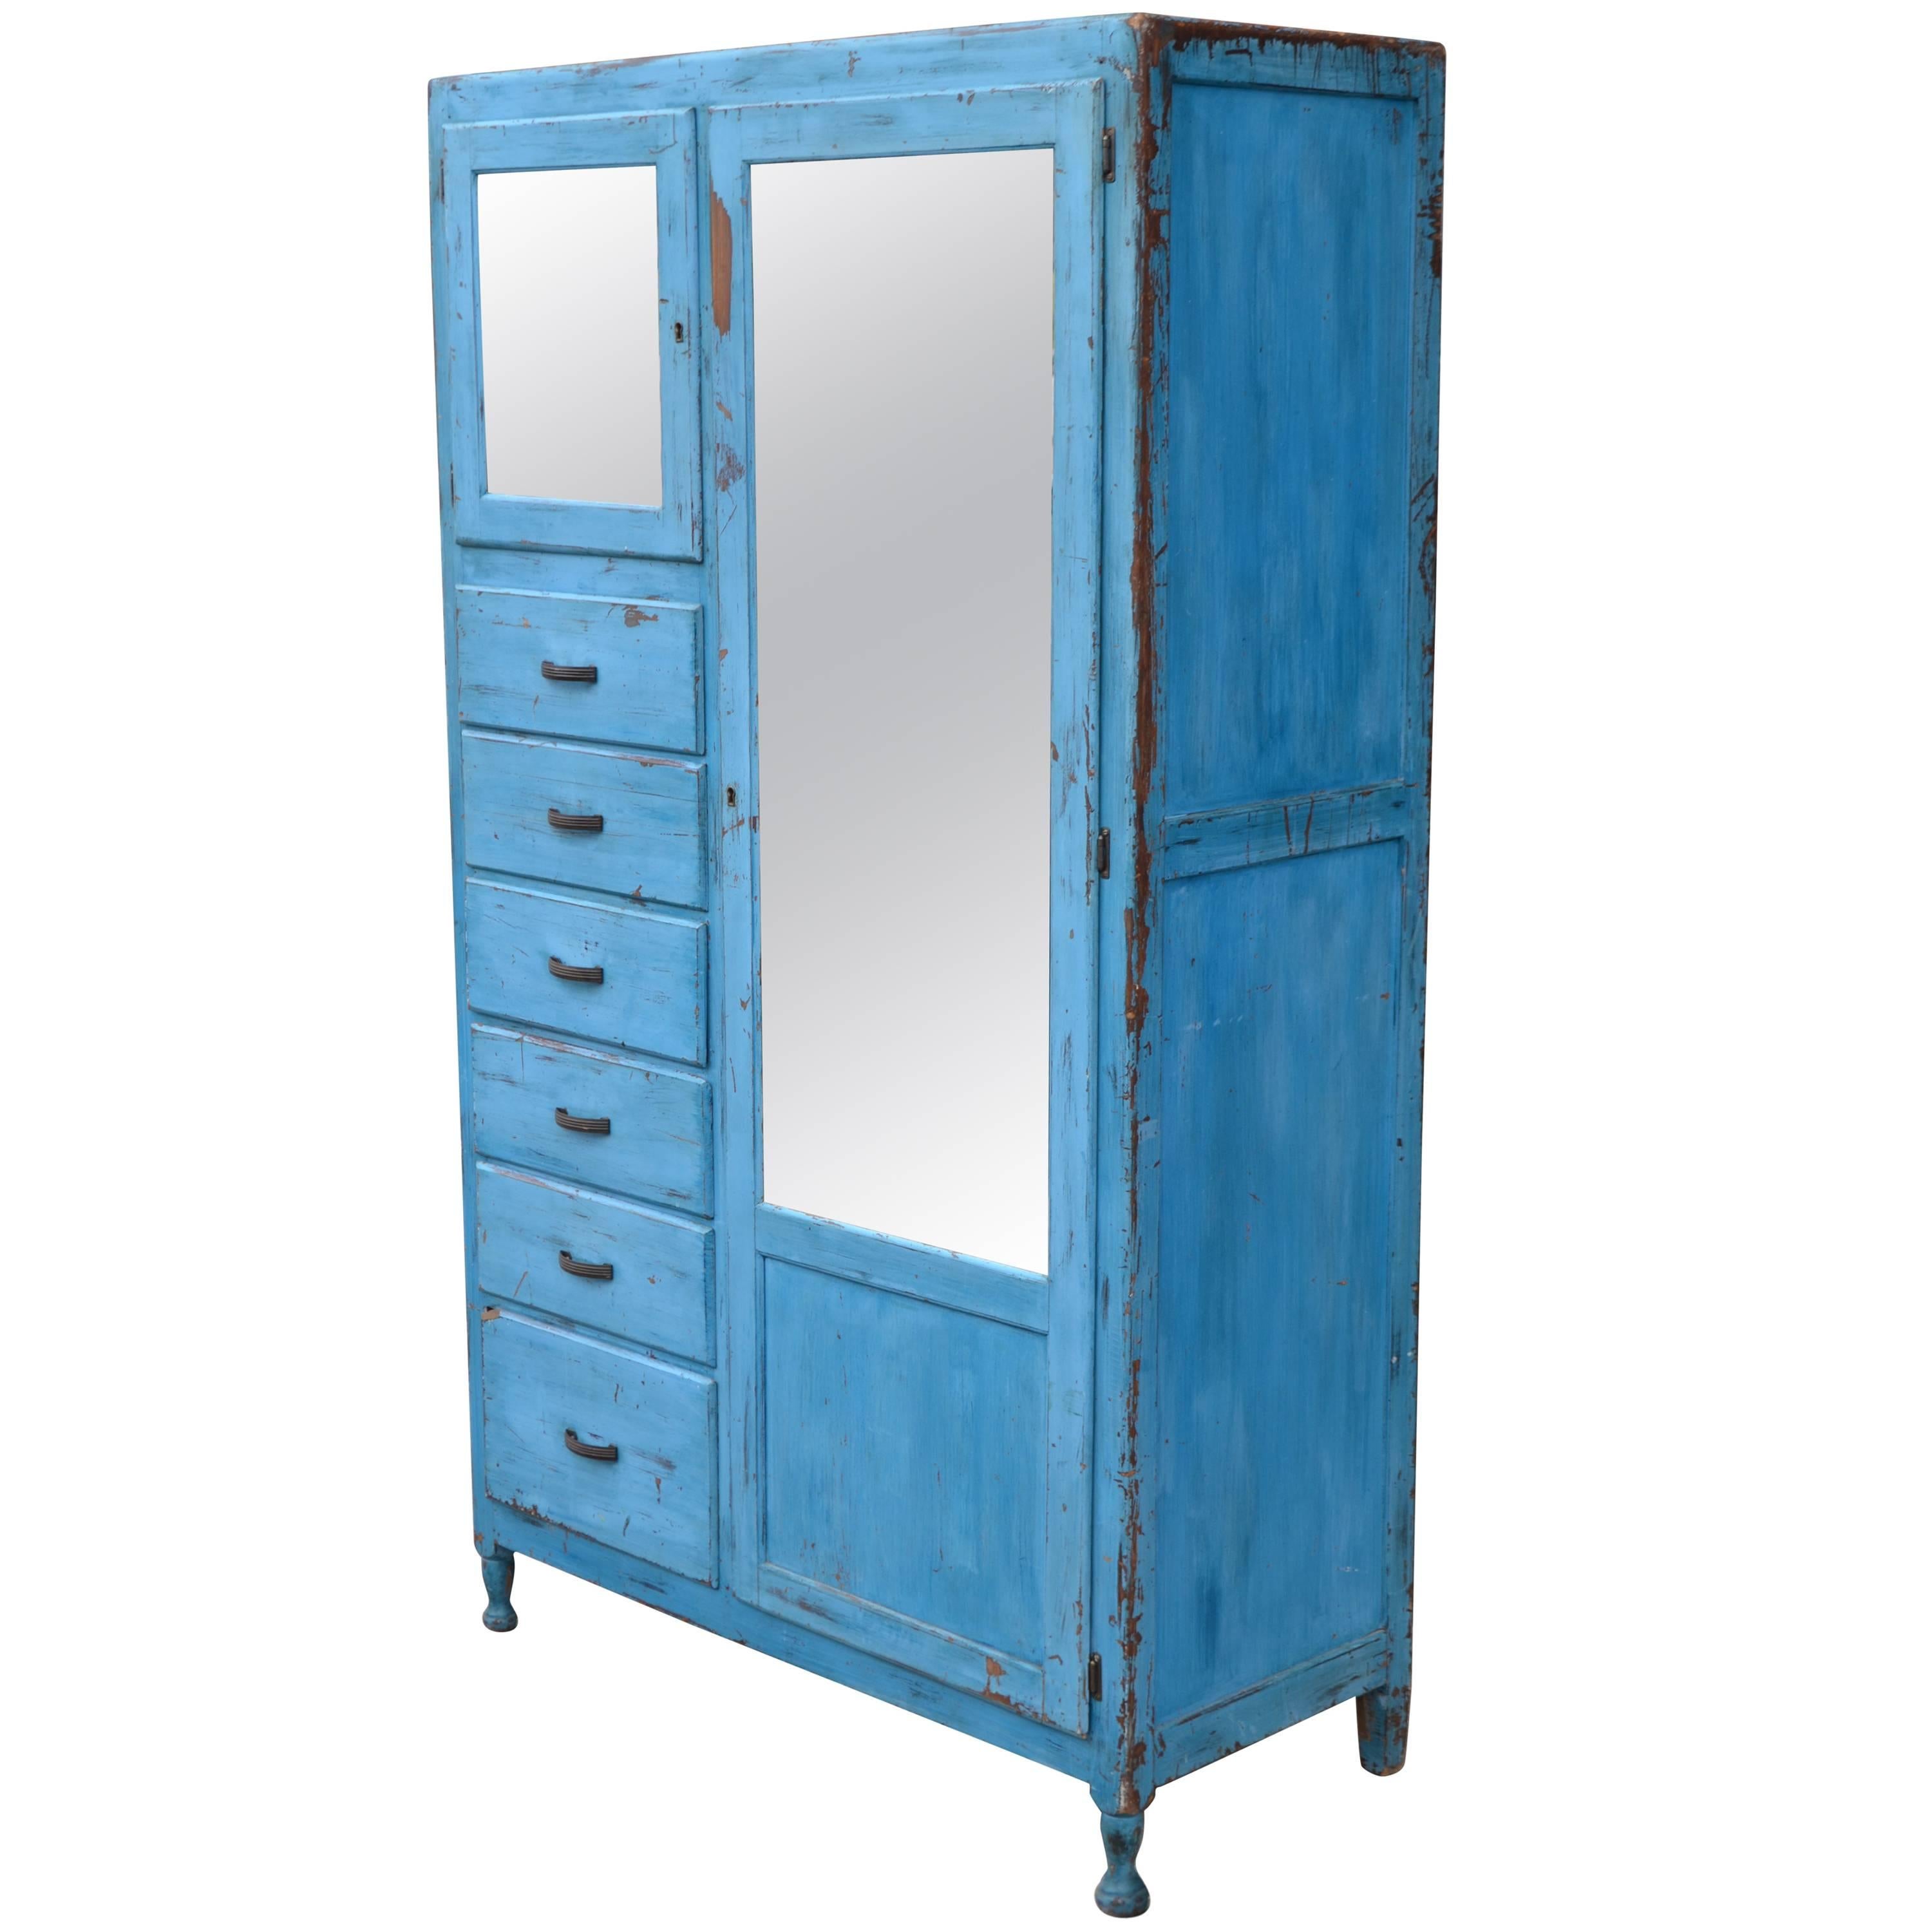 Storage Cupboard Closet, 1930s, in as-Found Blue for Home, Apartment, Cottage